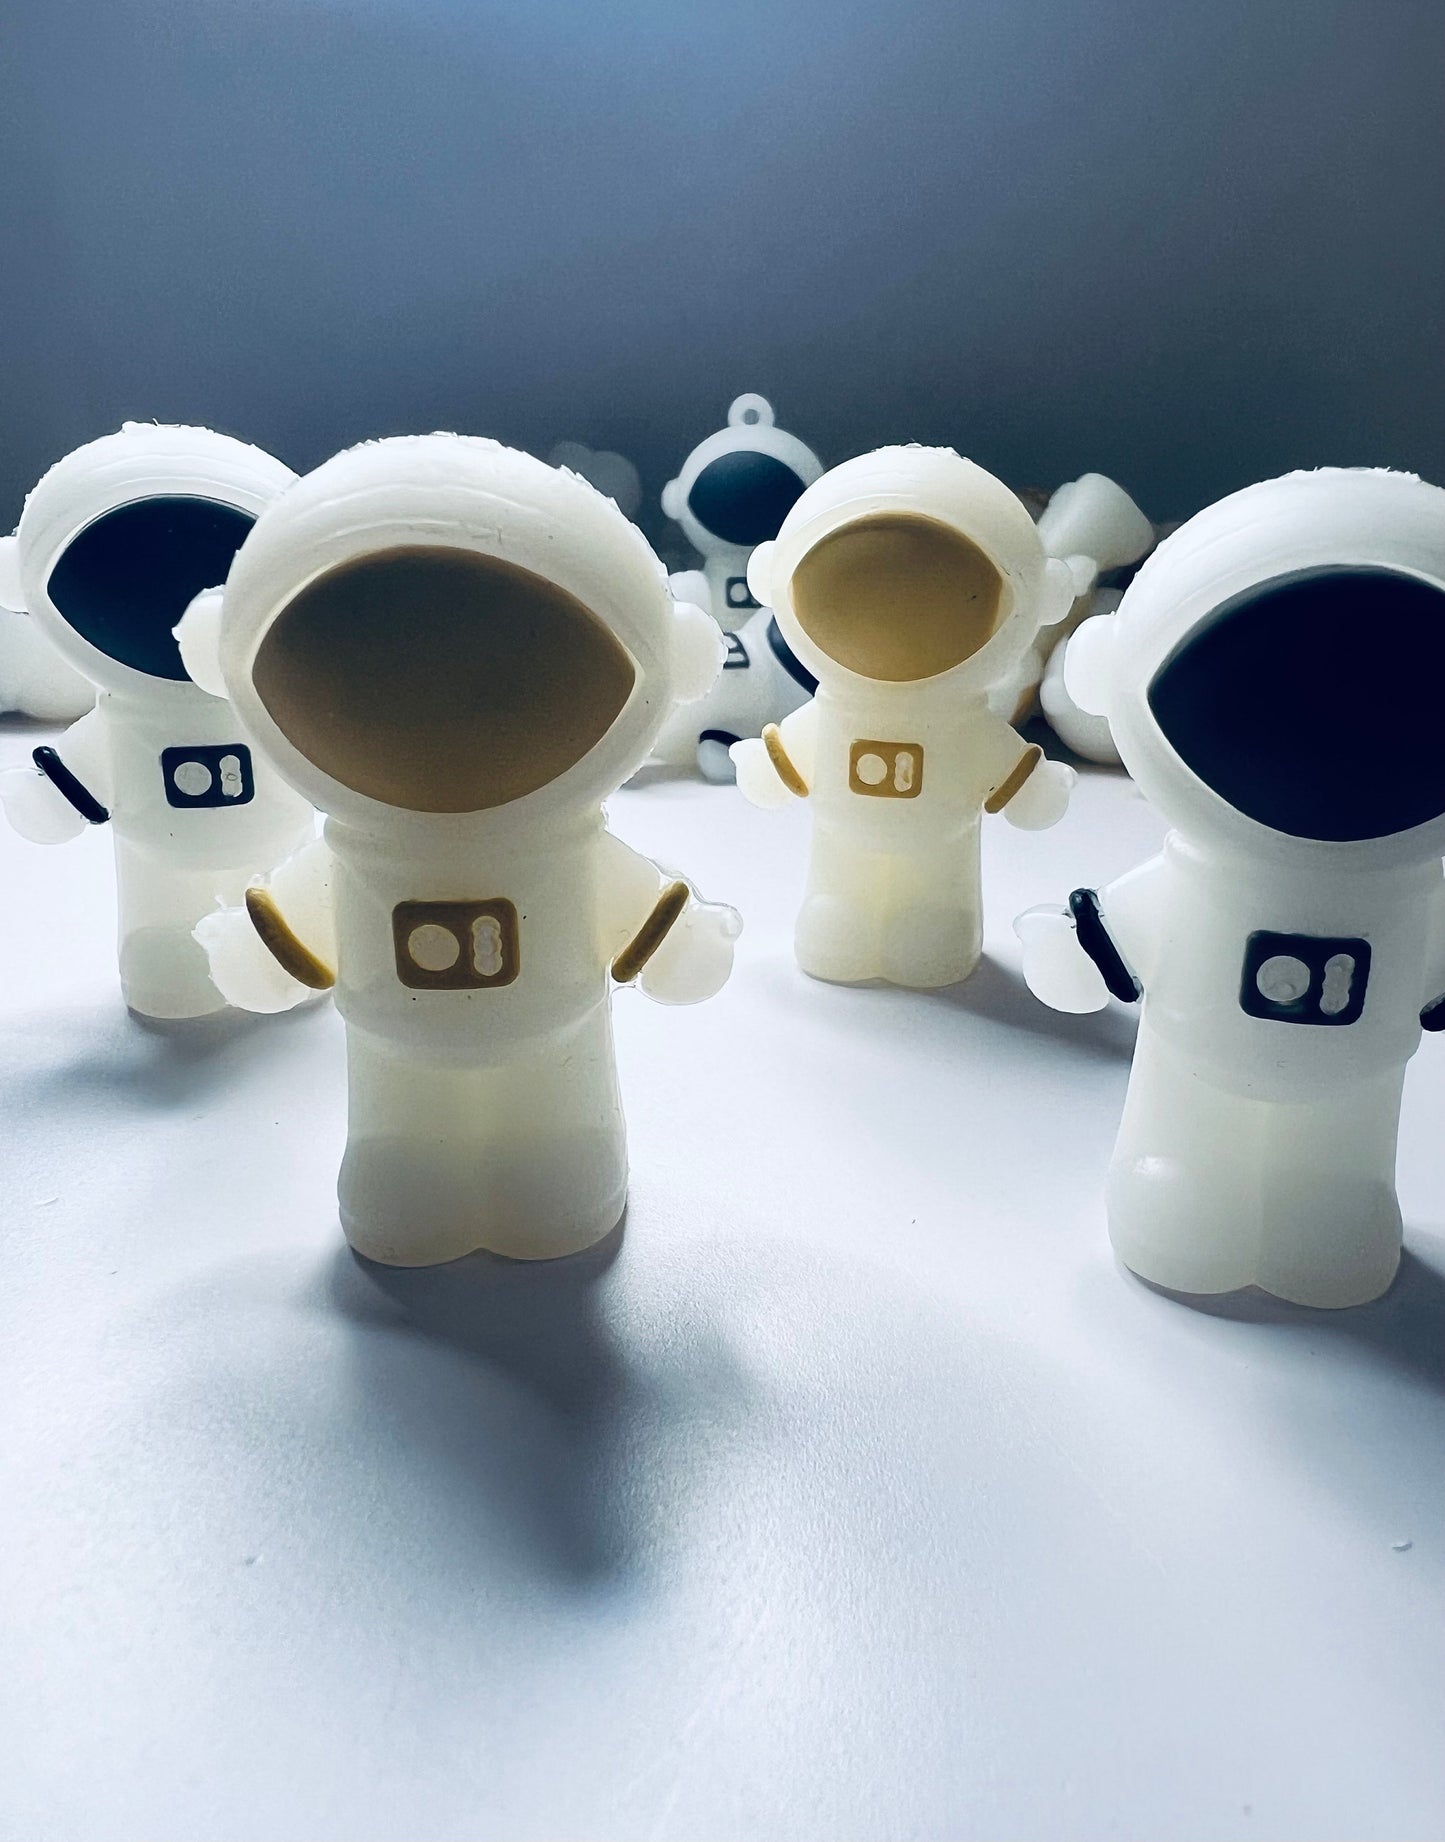 Miniature Astronaut Figure  3 D Object- Space Mini Objects - Space Trinkets - Minis for Speech Therapy - Montessori Language Objects - Space